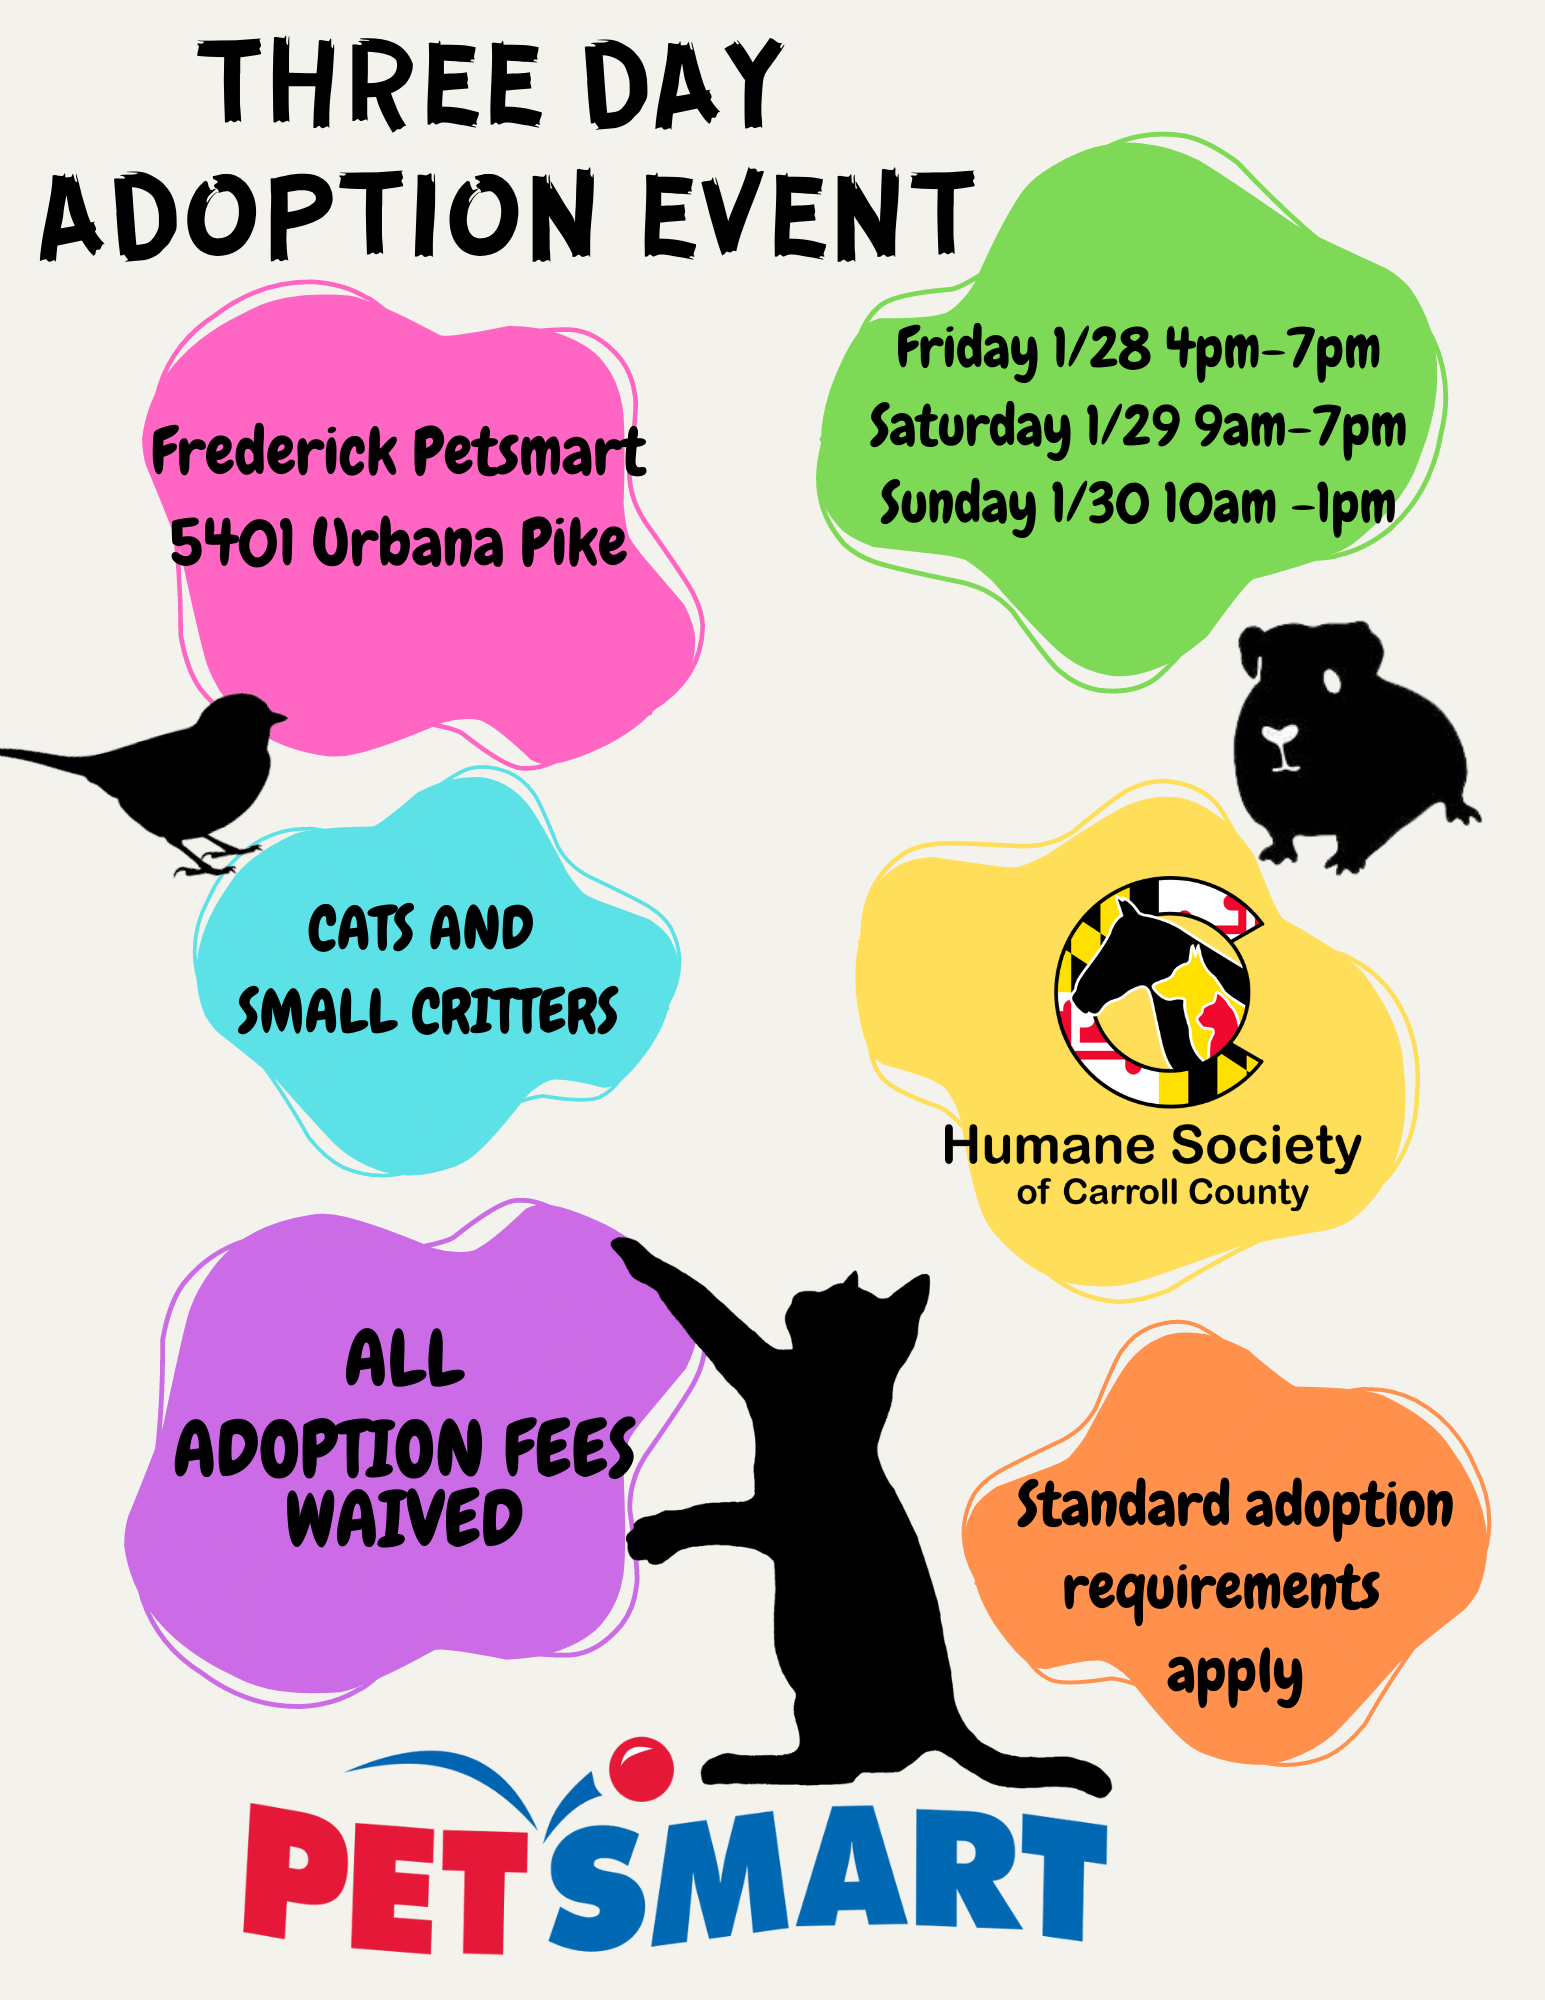 3 Day Adoption Event Frederick PetSmart Humane Society of Carroll County